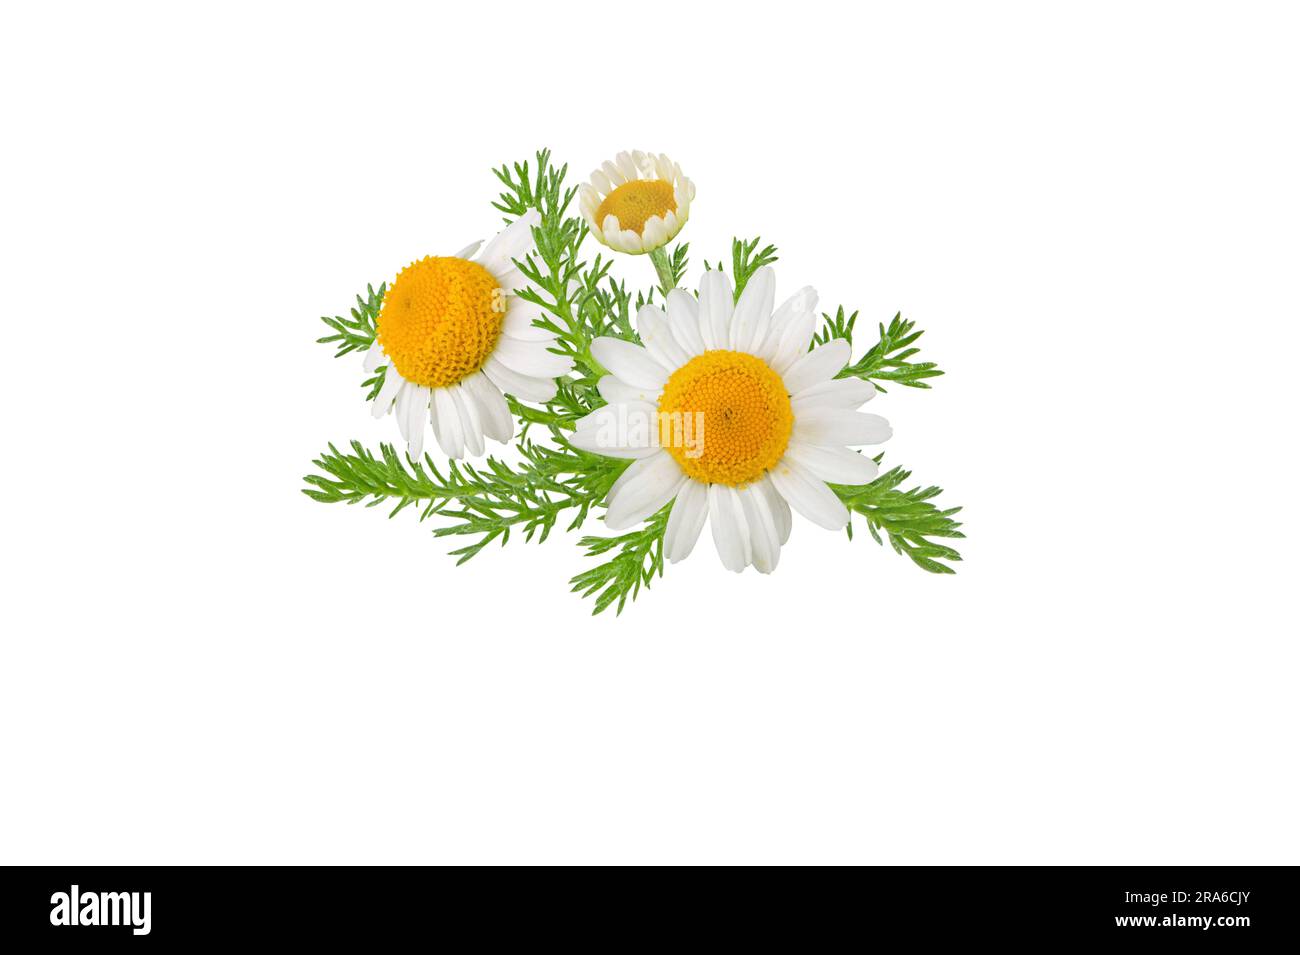 Chamomile flowers, buds and leaves bunch isolated on white. White daisy in bloom. Chamaemelum nobile herbal medicine plant. Stock Photo